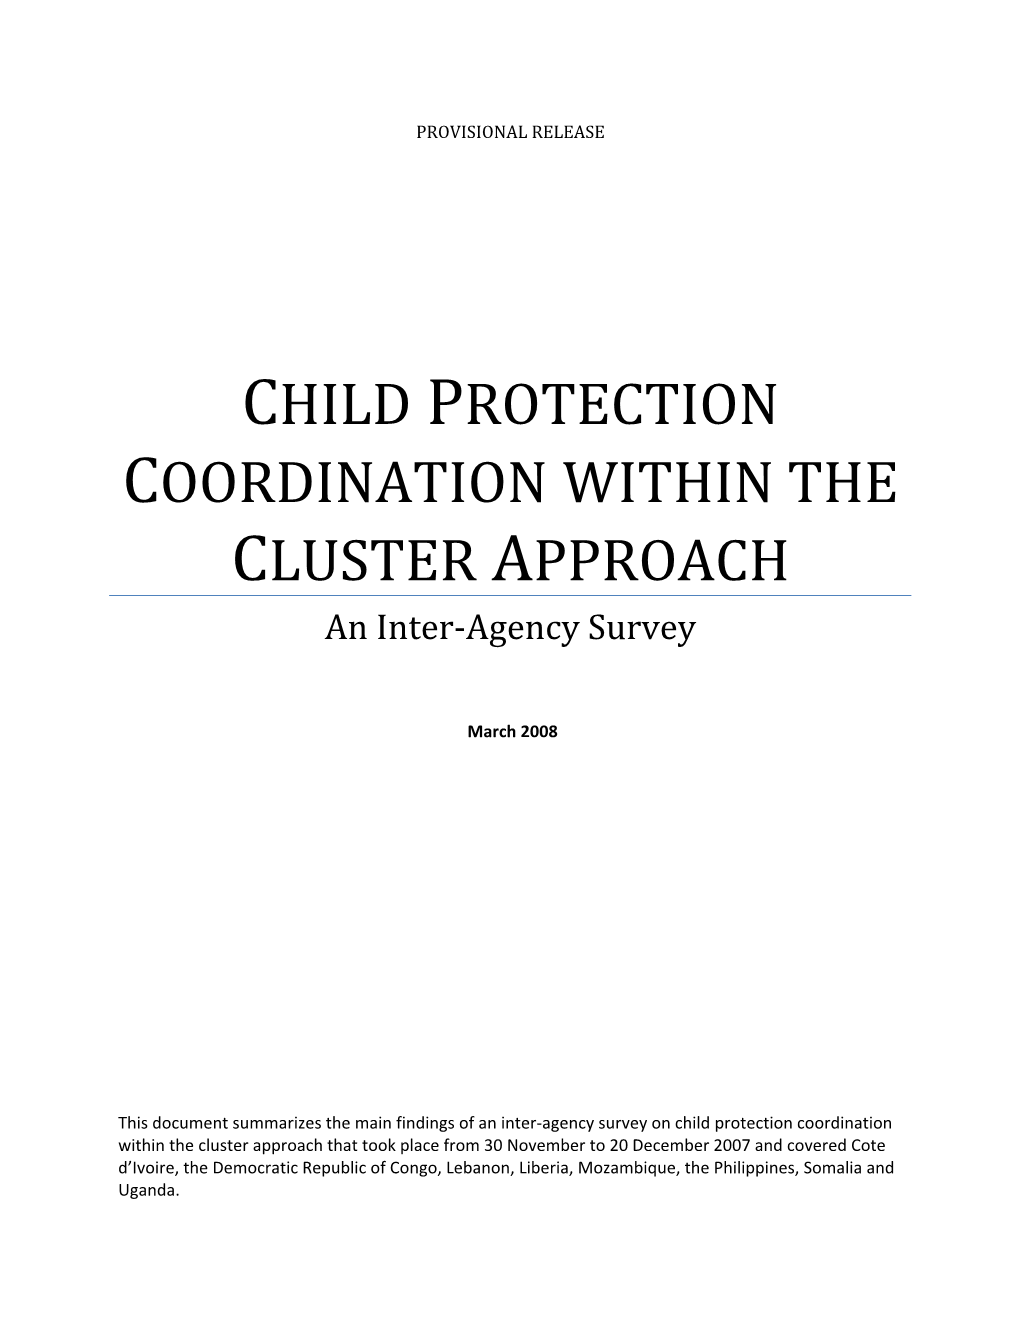 CHILD PROTECTION COORDINATION WITHIN the CLUSTER APPROACH an Inter‐Agency Survey